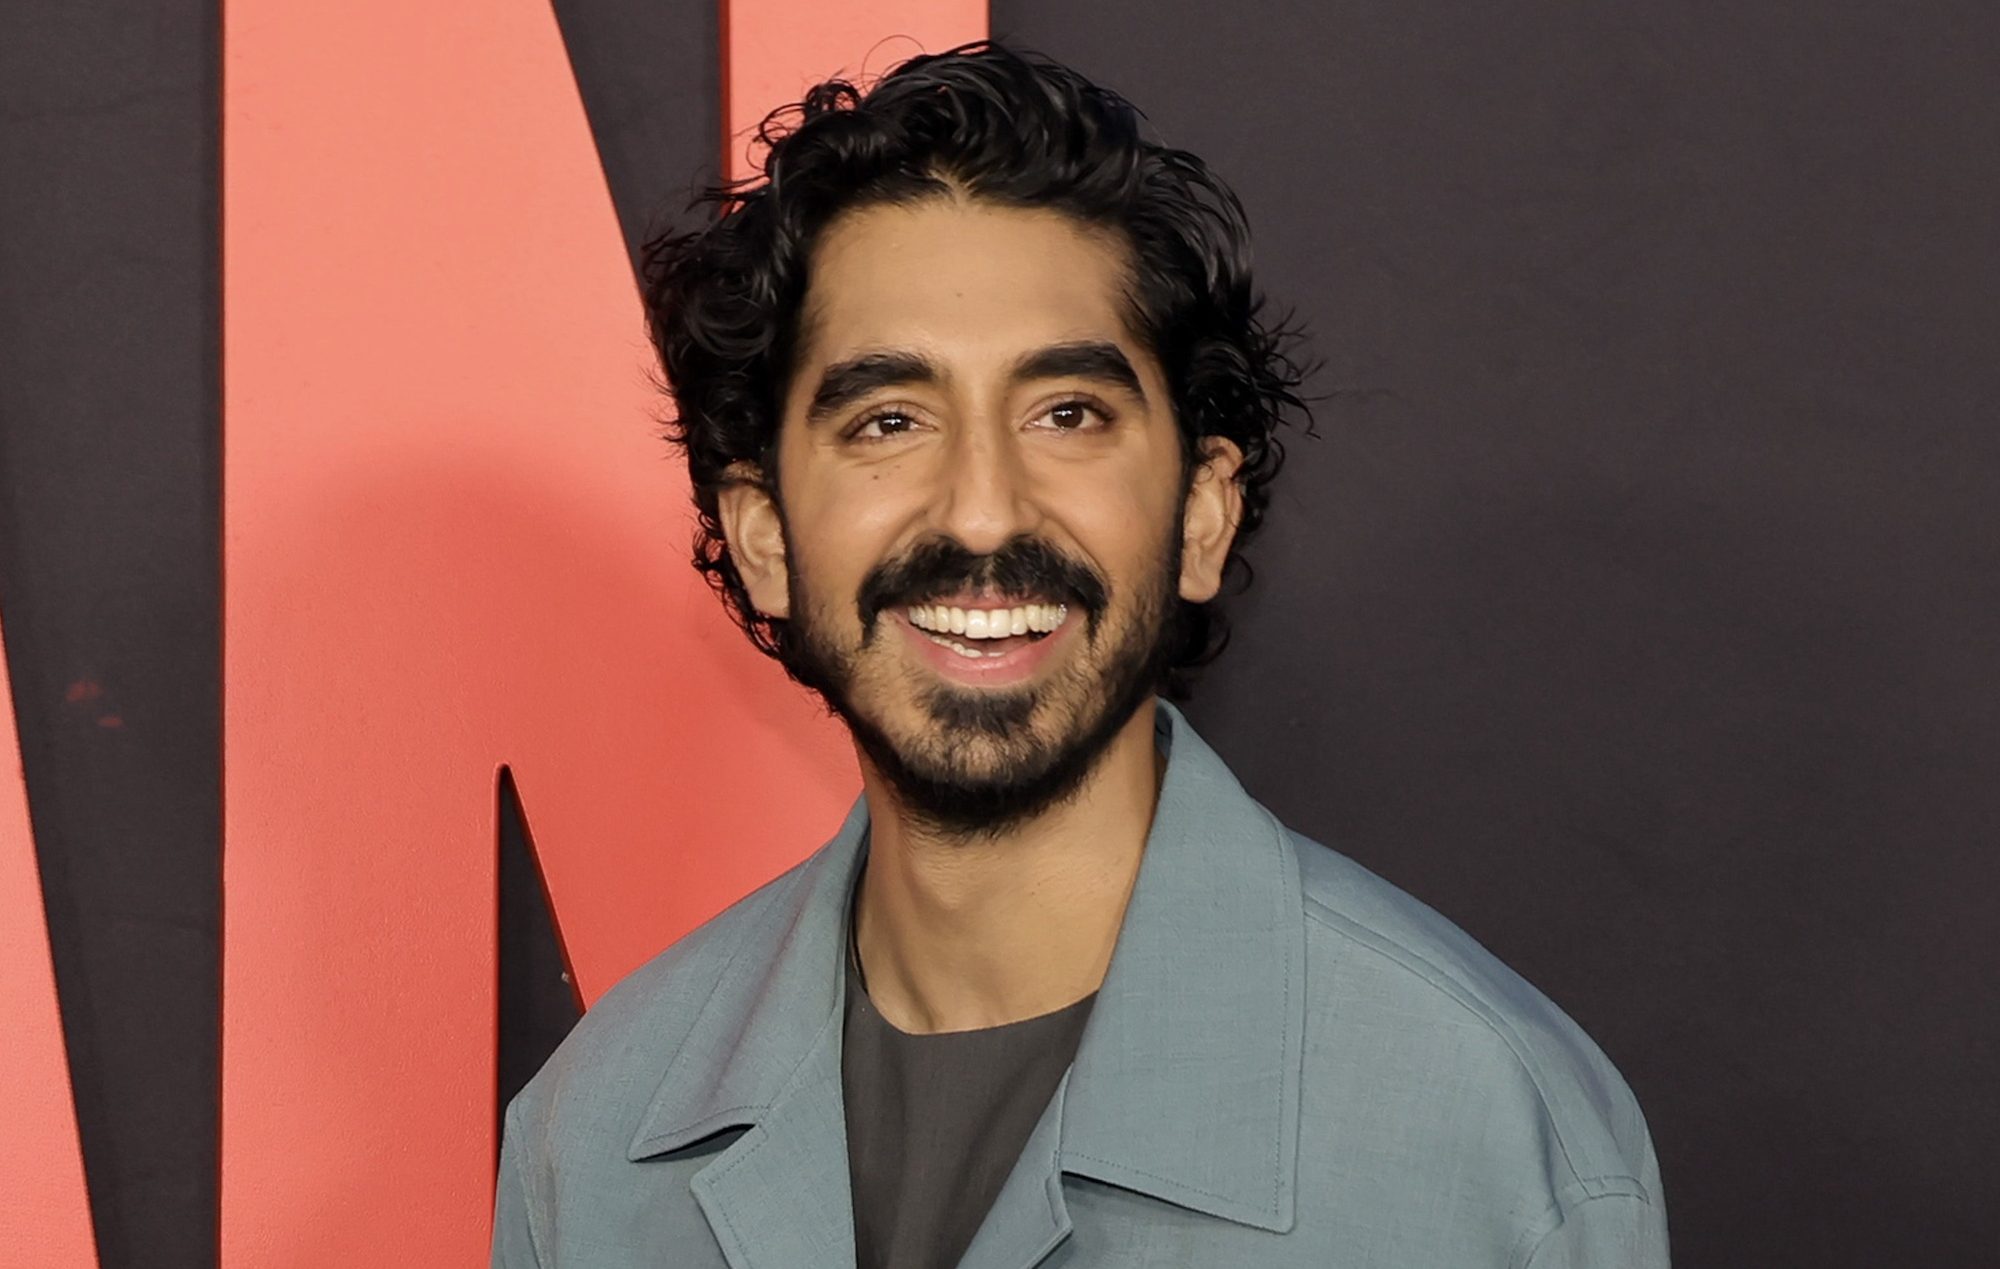 Dev Patel recalls “insane” ‘Skins’ parties where teens were “drugged off their faces”